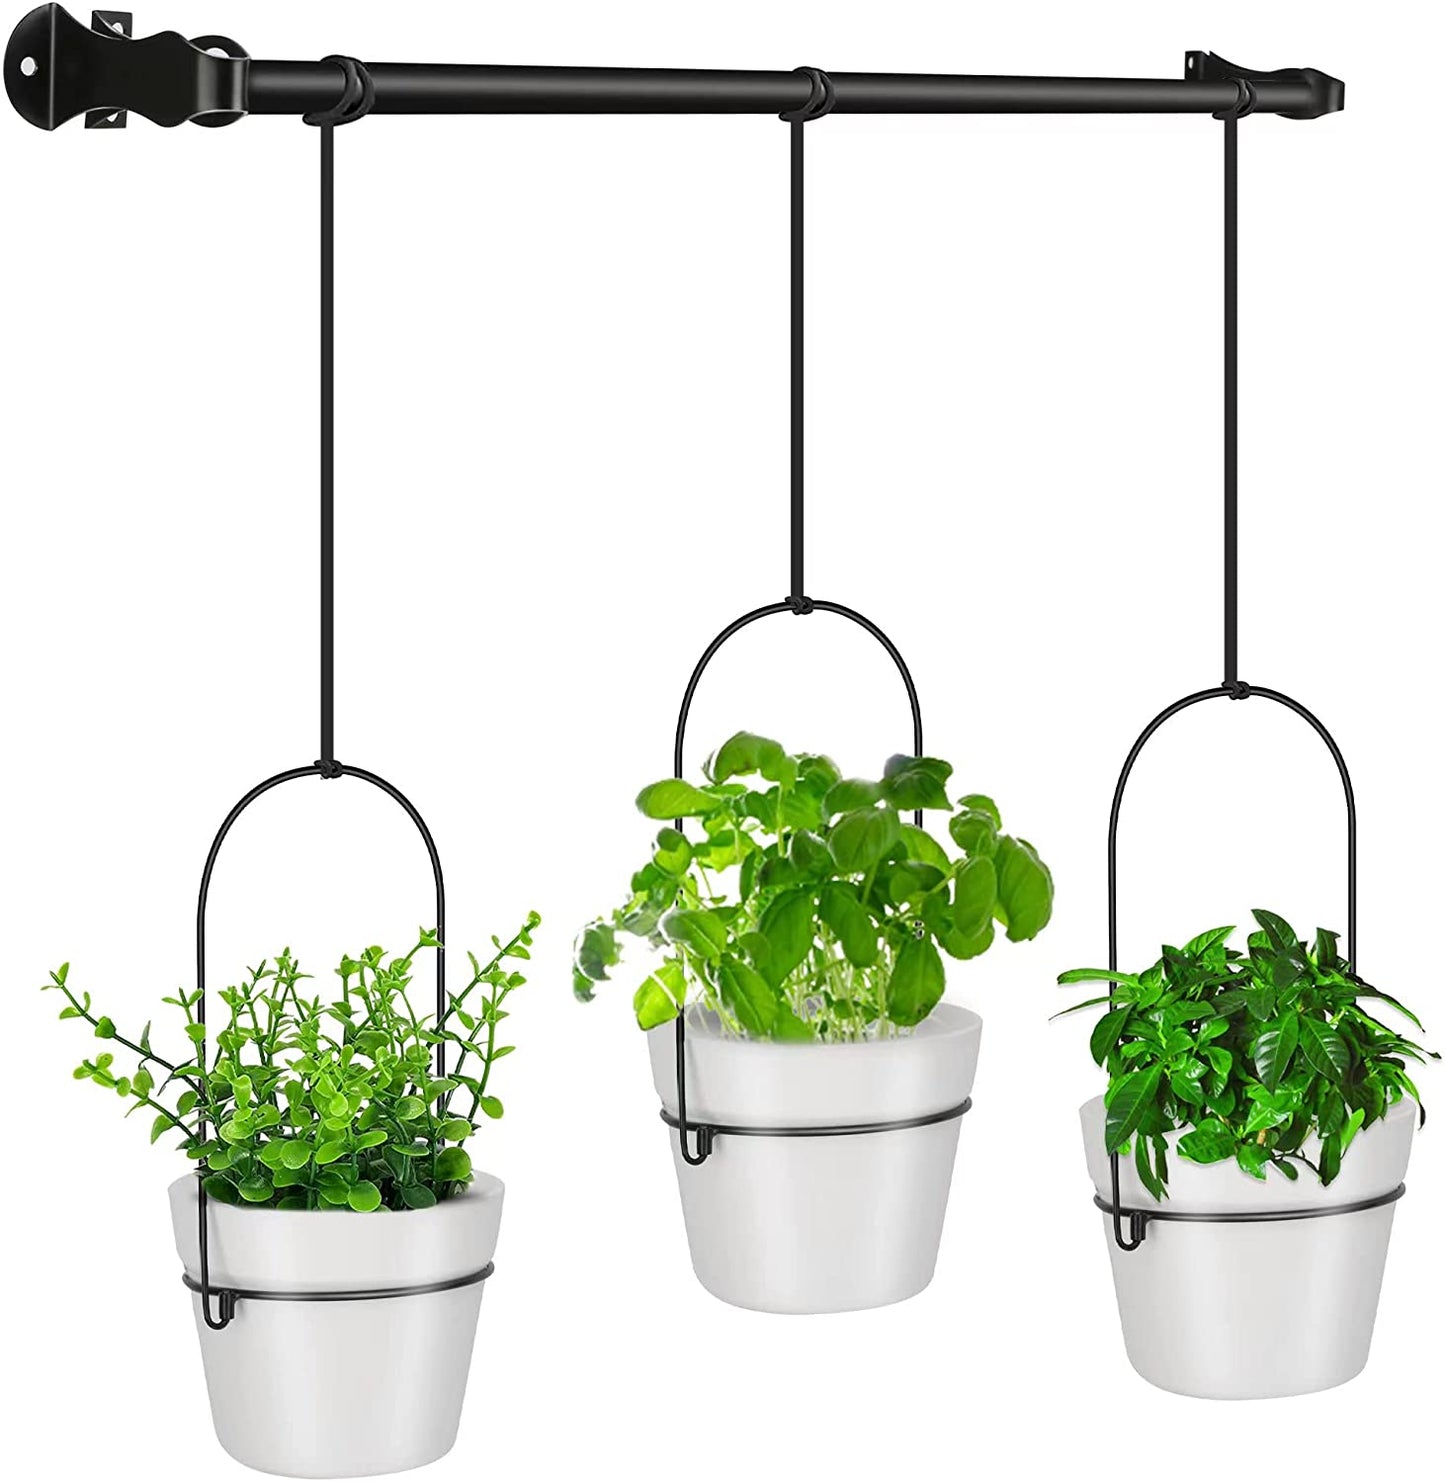 JOYSEUS Hanging Planters for Indoor Plants with 3 Plant Pots, Hanging Plant Holder - Modern Home Decor for Wall, Kitchen, Window